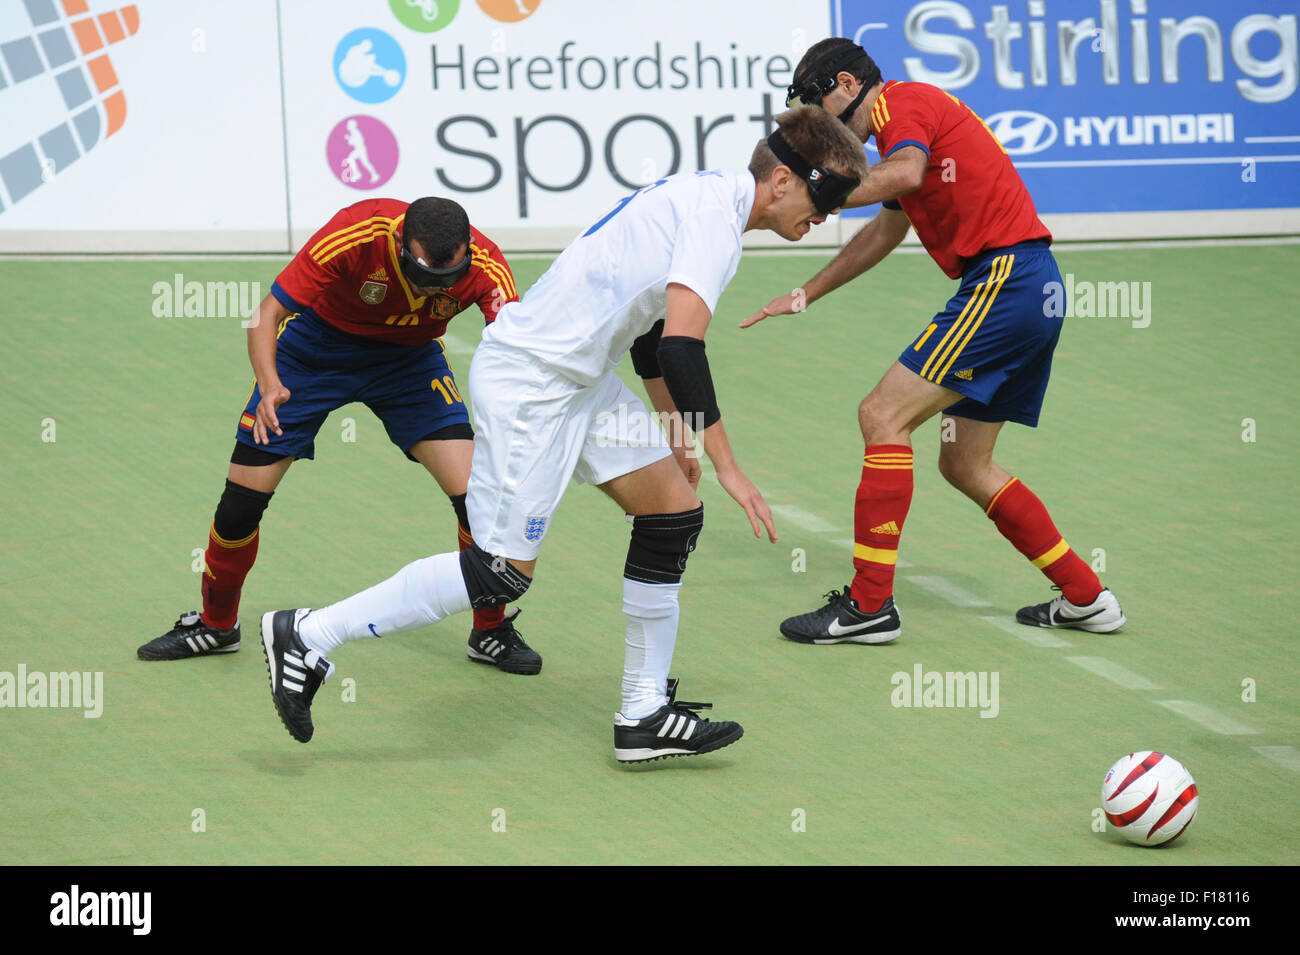 Hereford, UK. 29th Aug, 2015. IBSA Blind Football European Championships 2015 - 3rd/4th place play-off - England v Spain. Point 4, Royal National College for the Blind, Hereford. England's Robin Williams bursts past Youssef El Hadaoui & Marcelo Rosado. Credit:  James Maggs/Alamy Live News Stock Photo